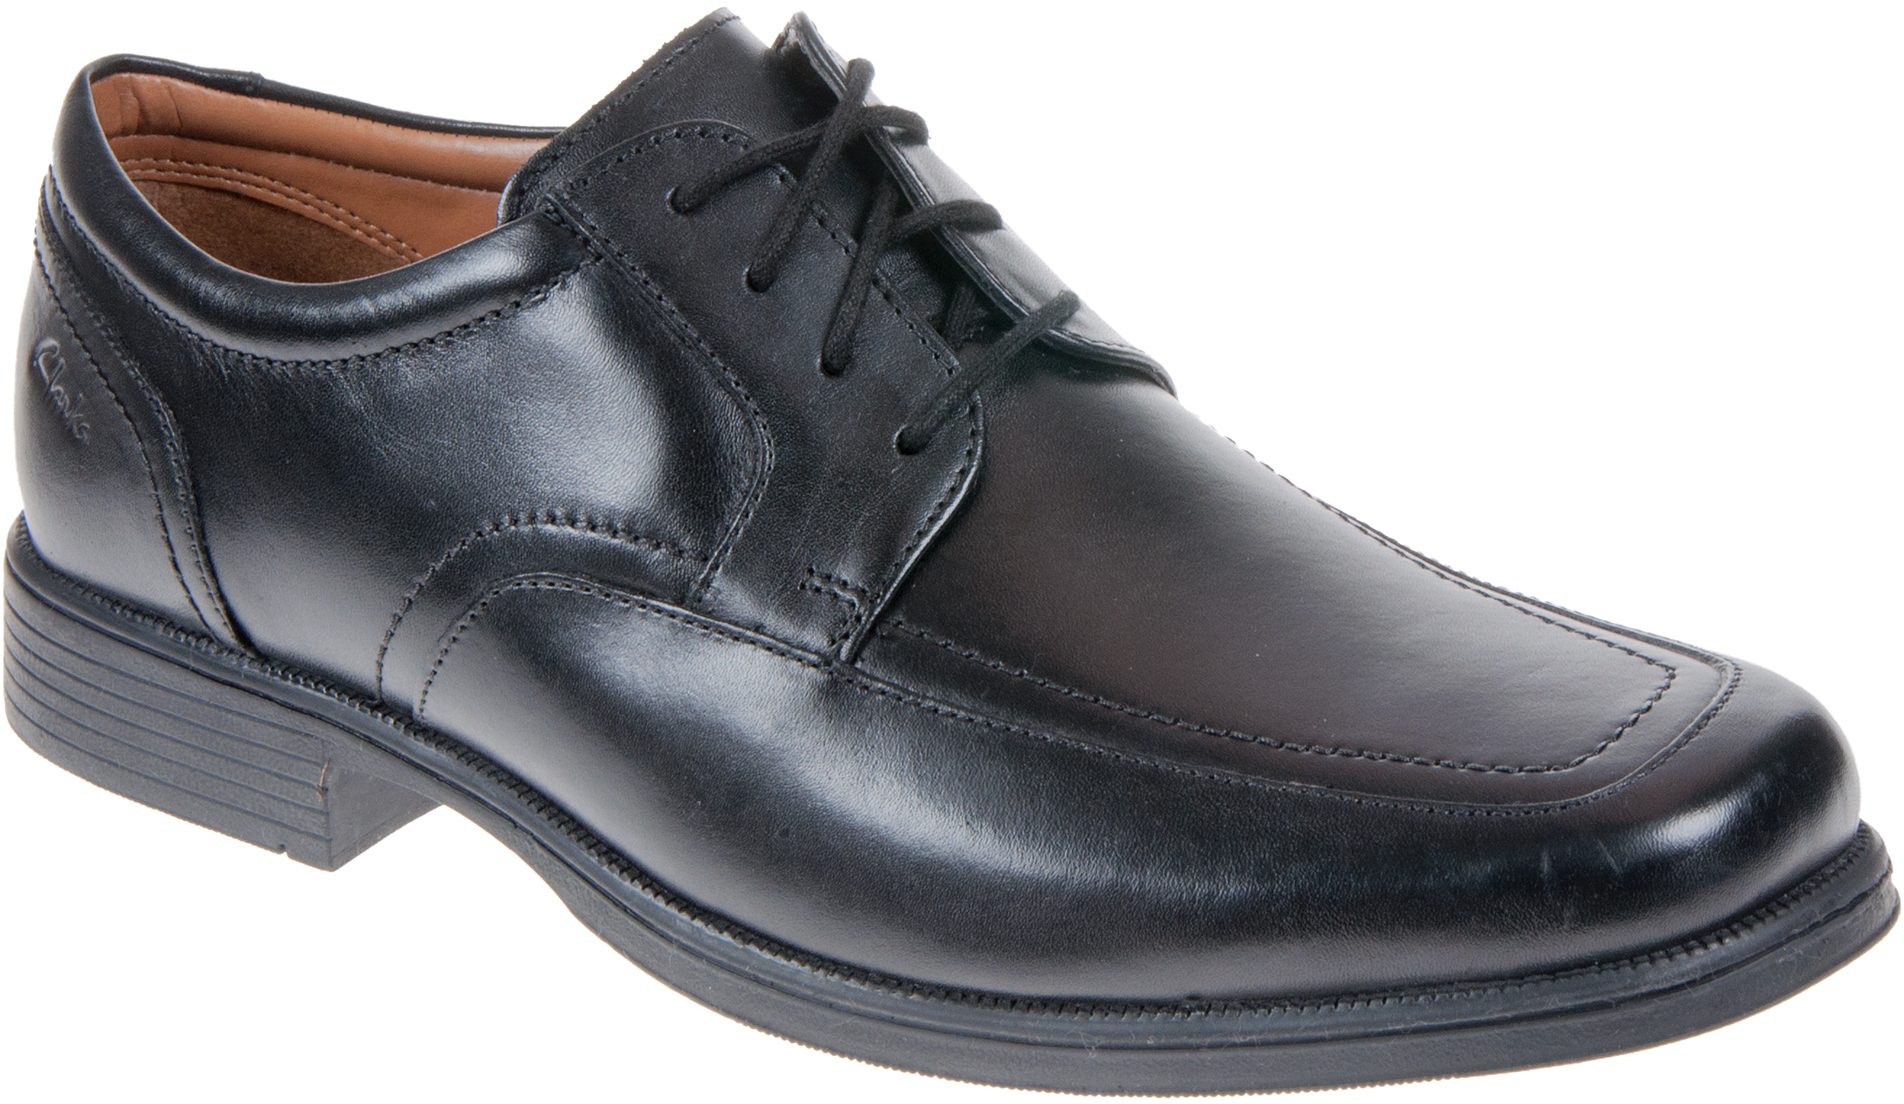 Mens HUCKLEY WORK Black leather slip on shoes   by CLARKS   £44.99 